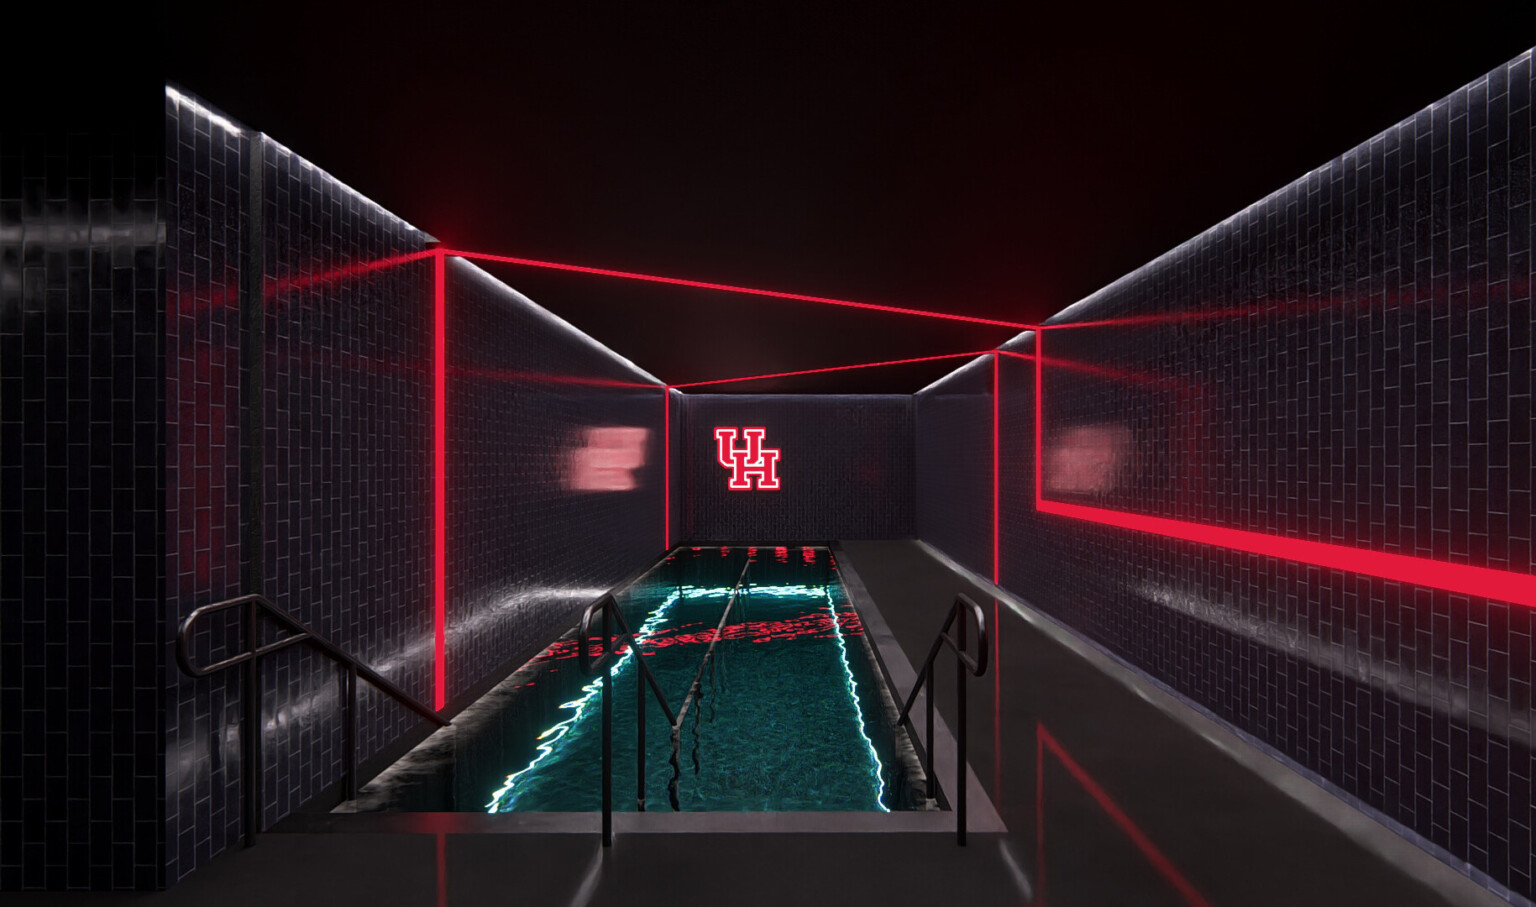 Indoor pool with black walls, red light accents, and a red logo on the back wall